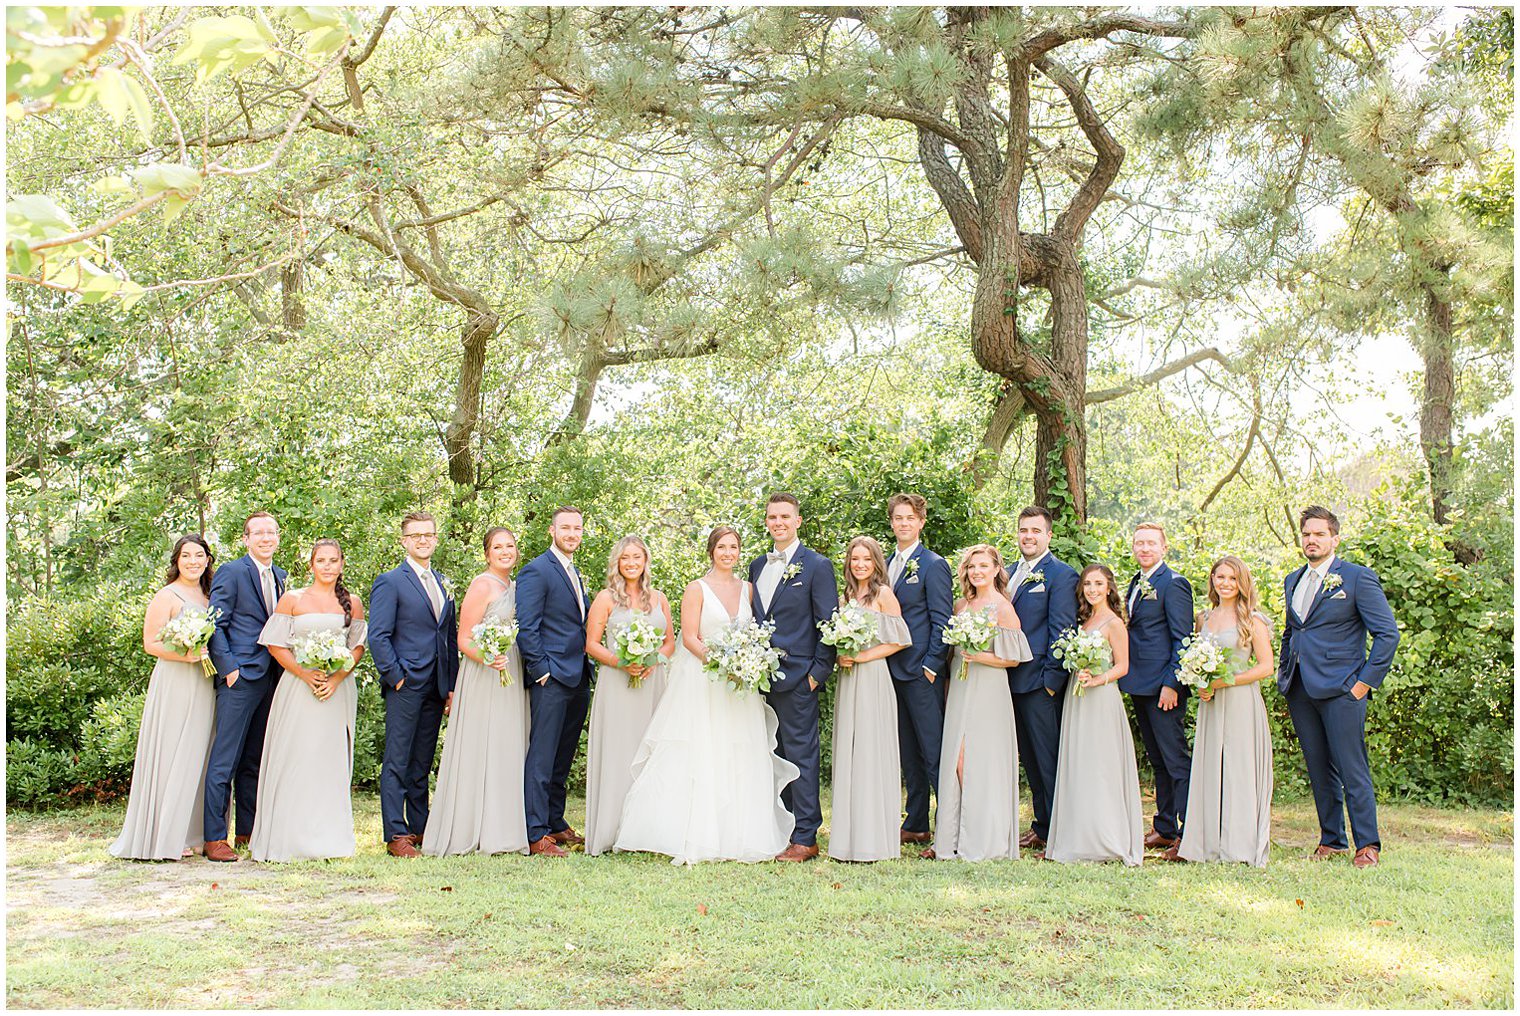 bride and groom pose with wedding party in grey dresses and navy suits